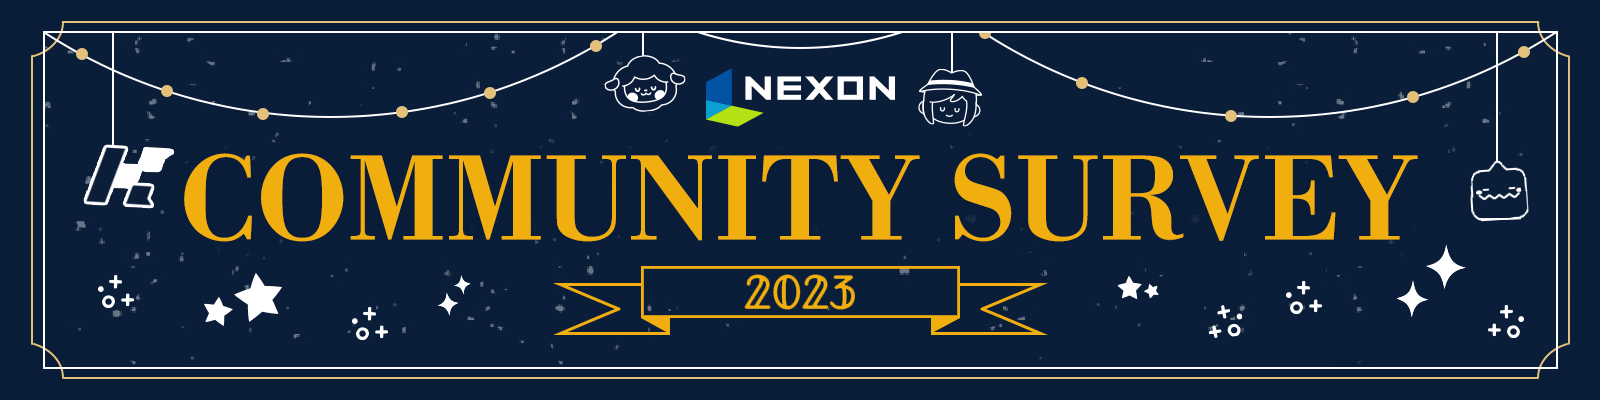 wgc-603-end-of-year-community-survey-banner_1600x400_1.png